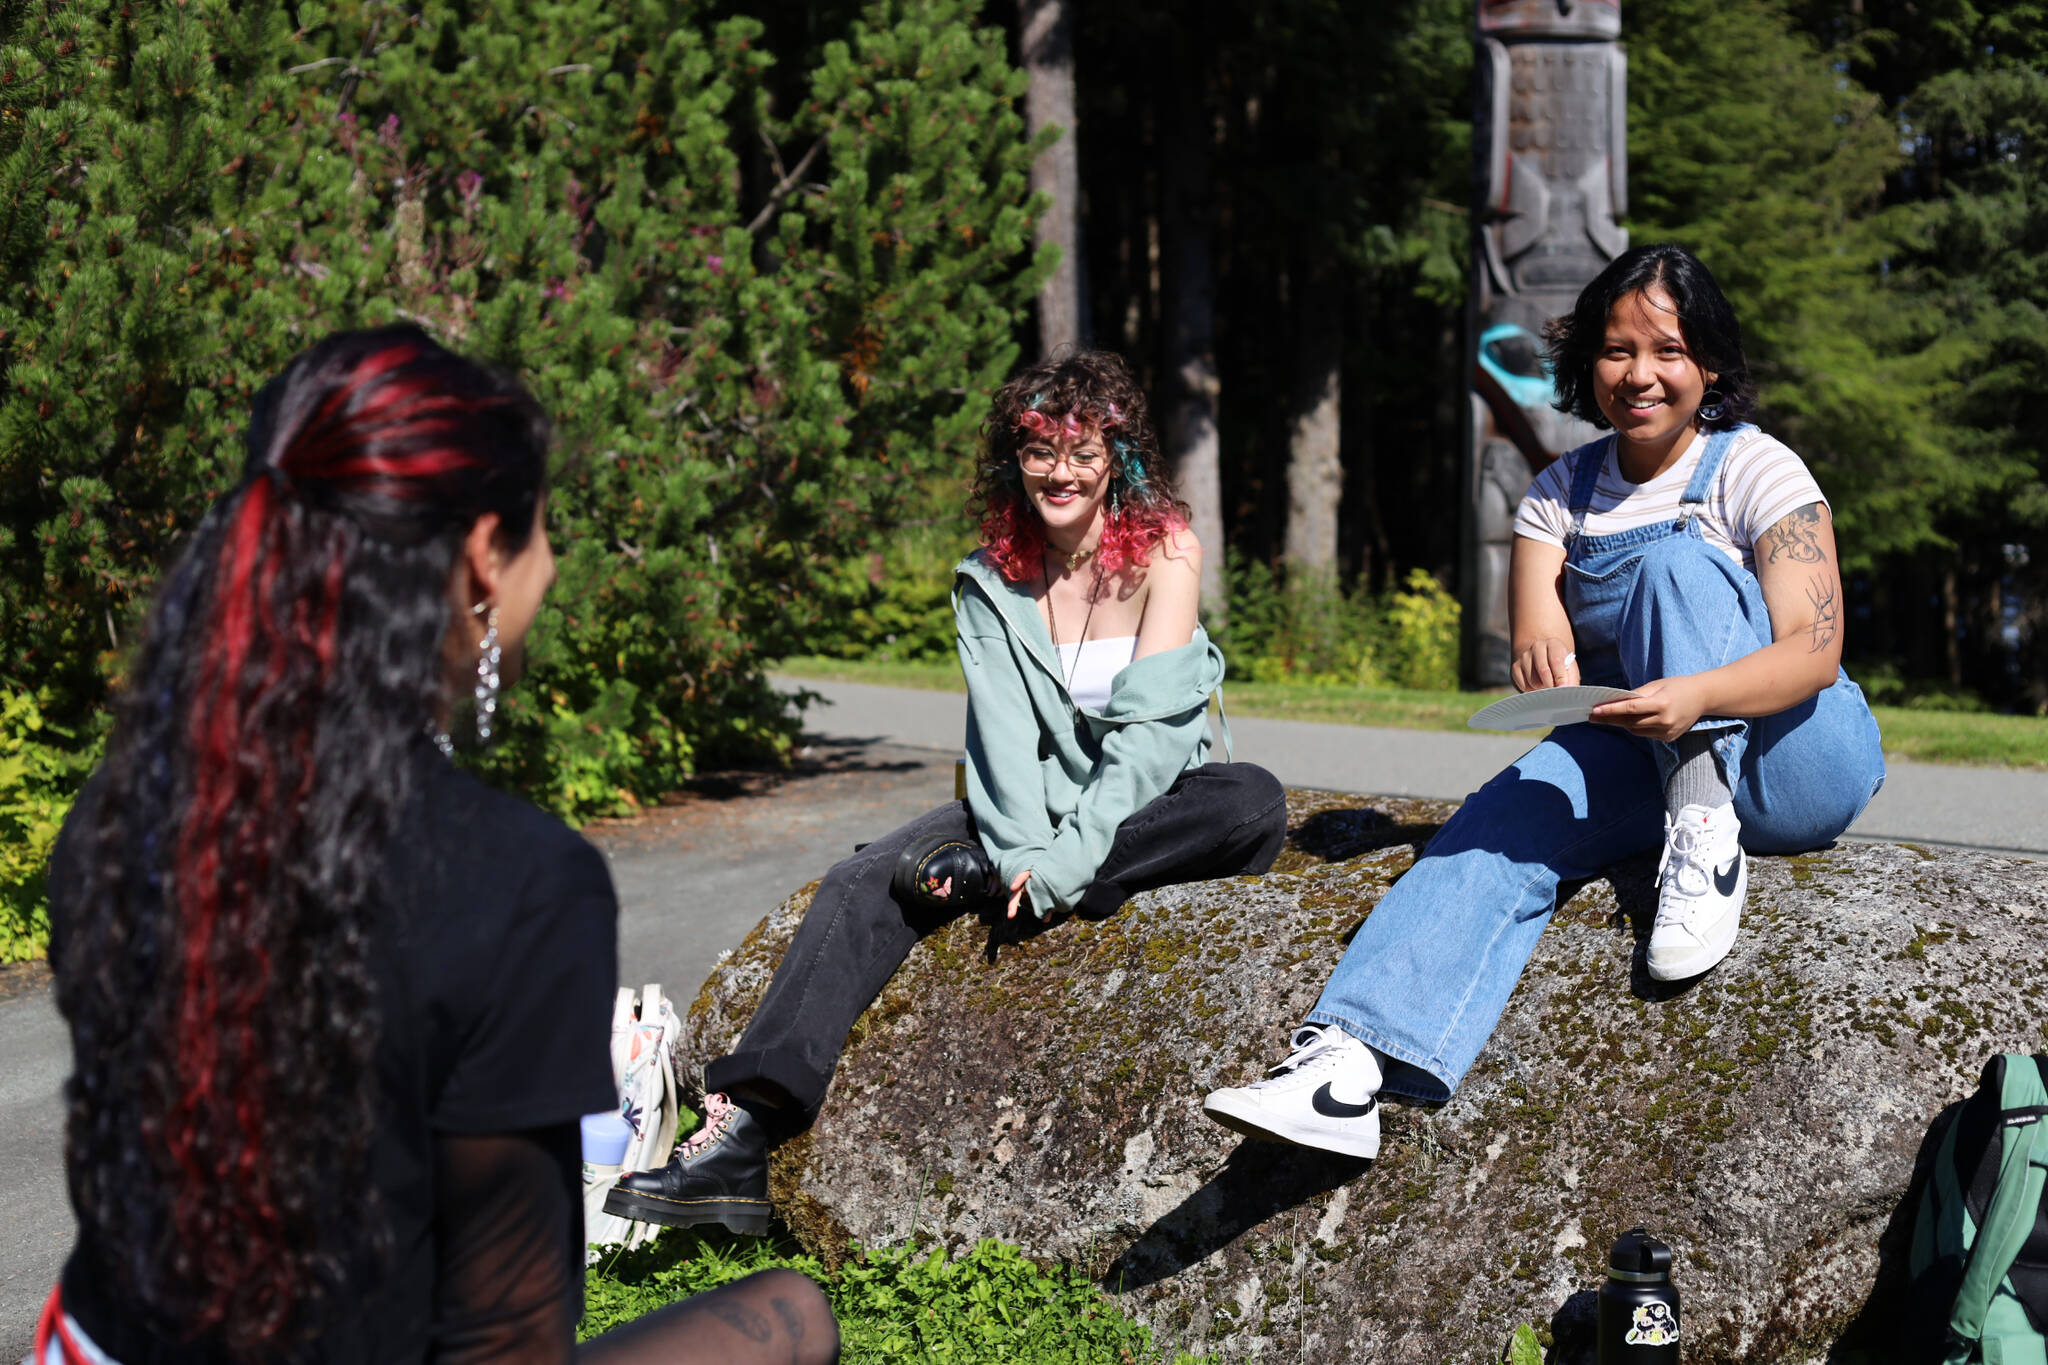 From left to right, students Kelby Randall, KC Abad and Sage Chavez smile as they sit outside during a lunch break Monday afternoon at the University of Alaska Southeast campus in Juneau on the first day of the 2023 fall semester. (Clarise Larson / Juneau Empire)